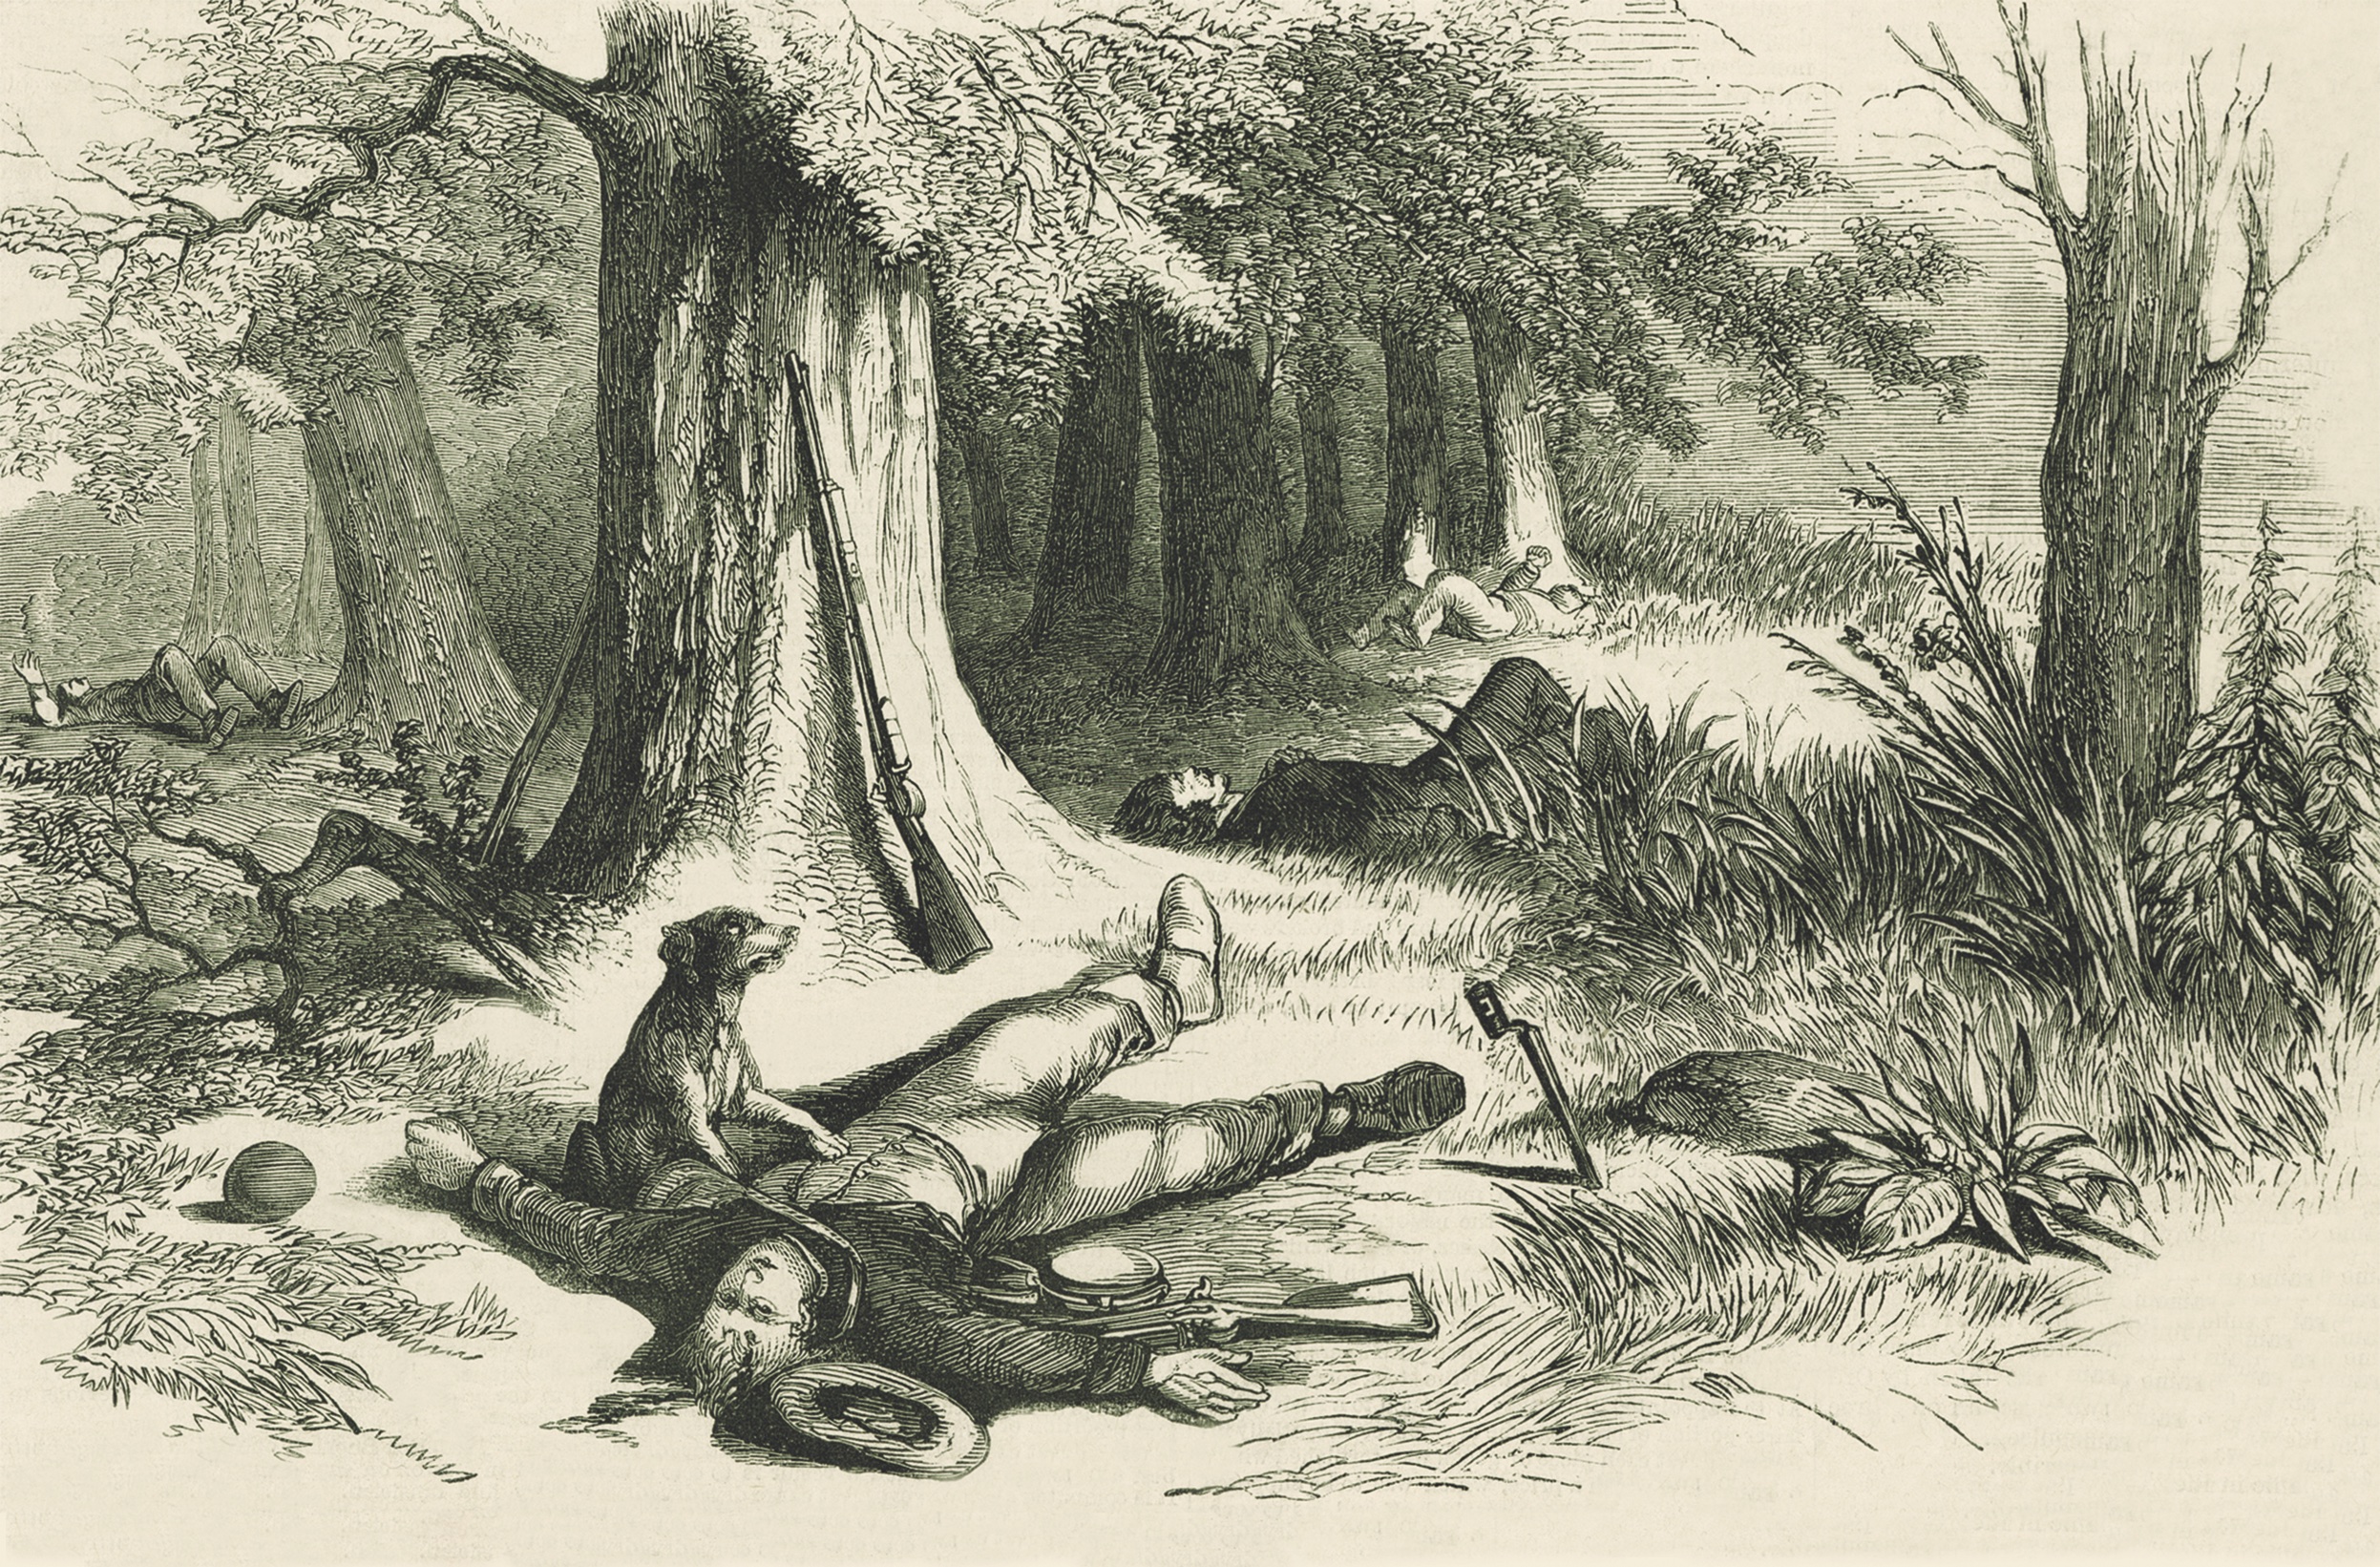 This sketch, which appeared in Frank Leslie’s Illustrated Newspaper, portrays “A faithful dog watching and defending the body of his dead rebel master,” slain during Sheridan’s 1864 Shenandoah Valley Campaign. (Frank Leslie’s Illustrated Newspaper)